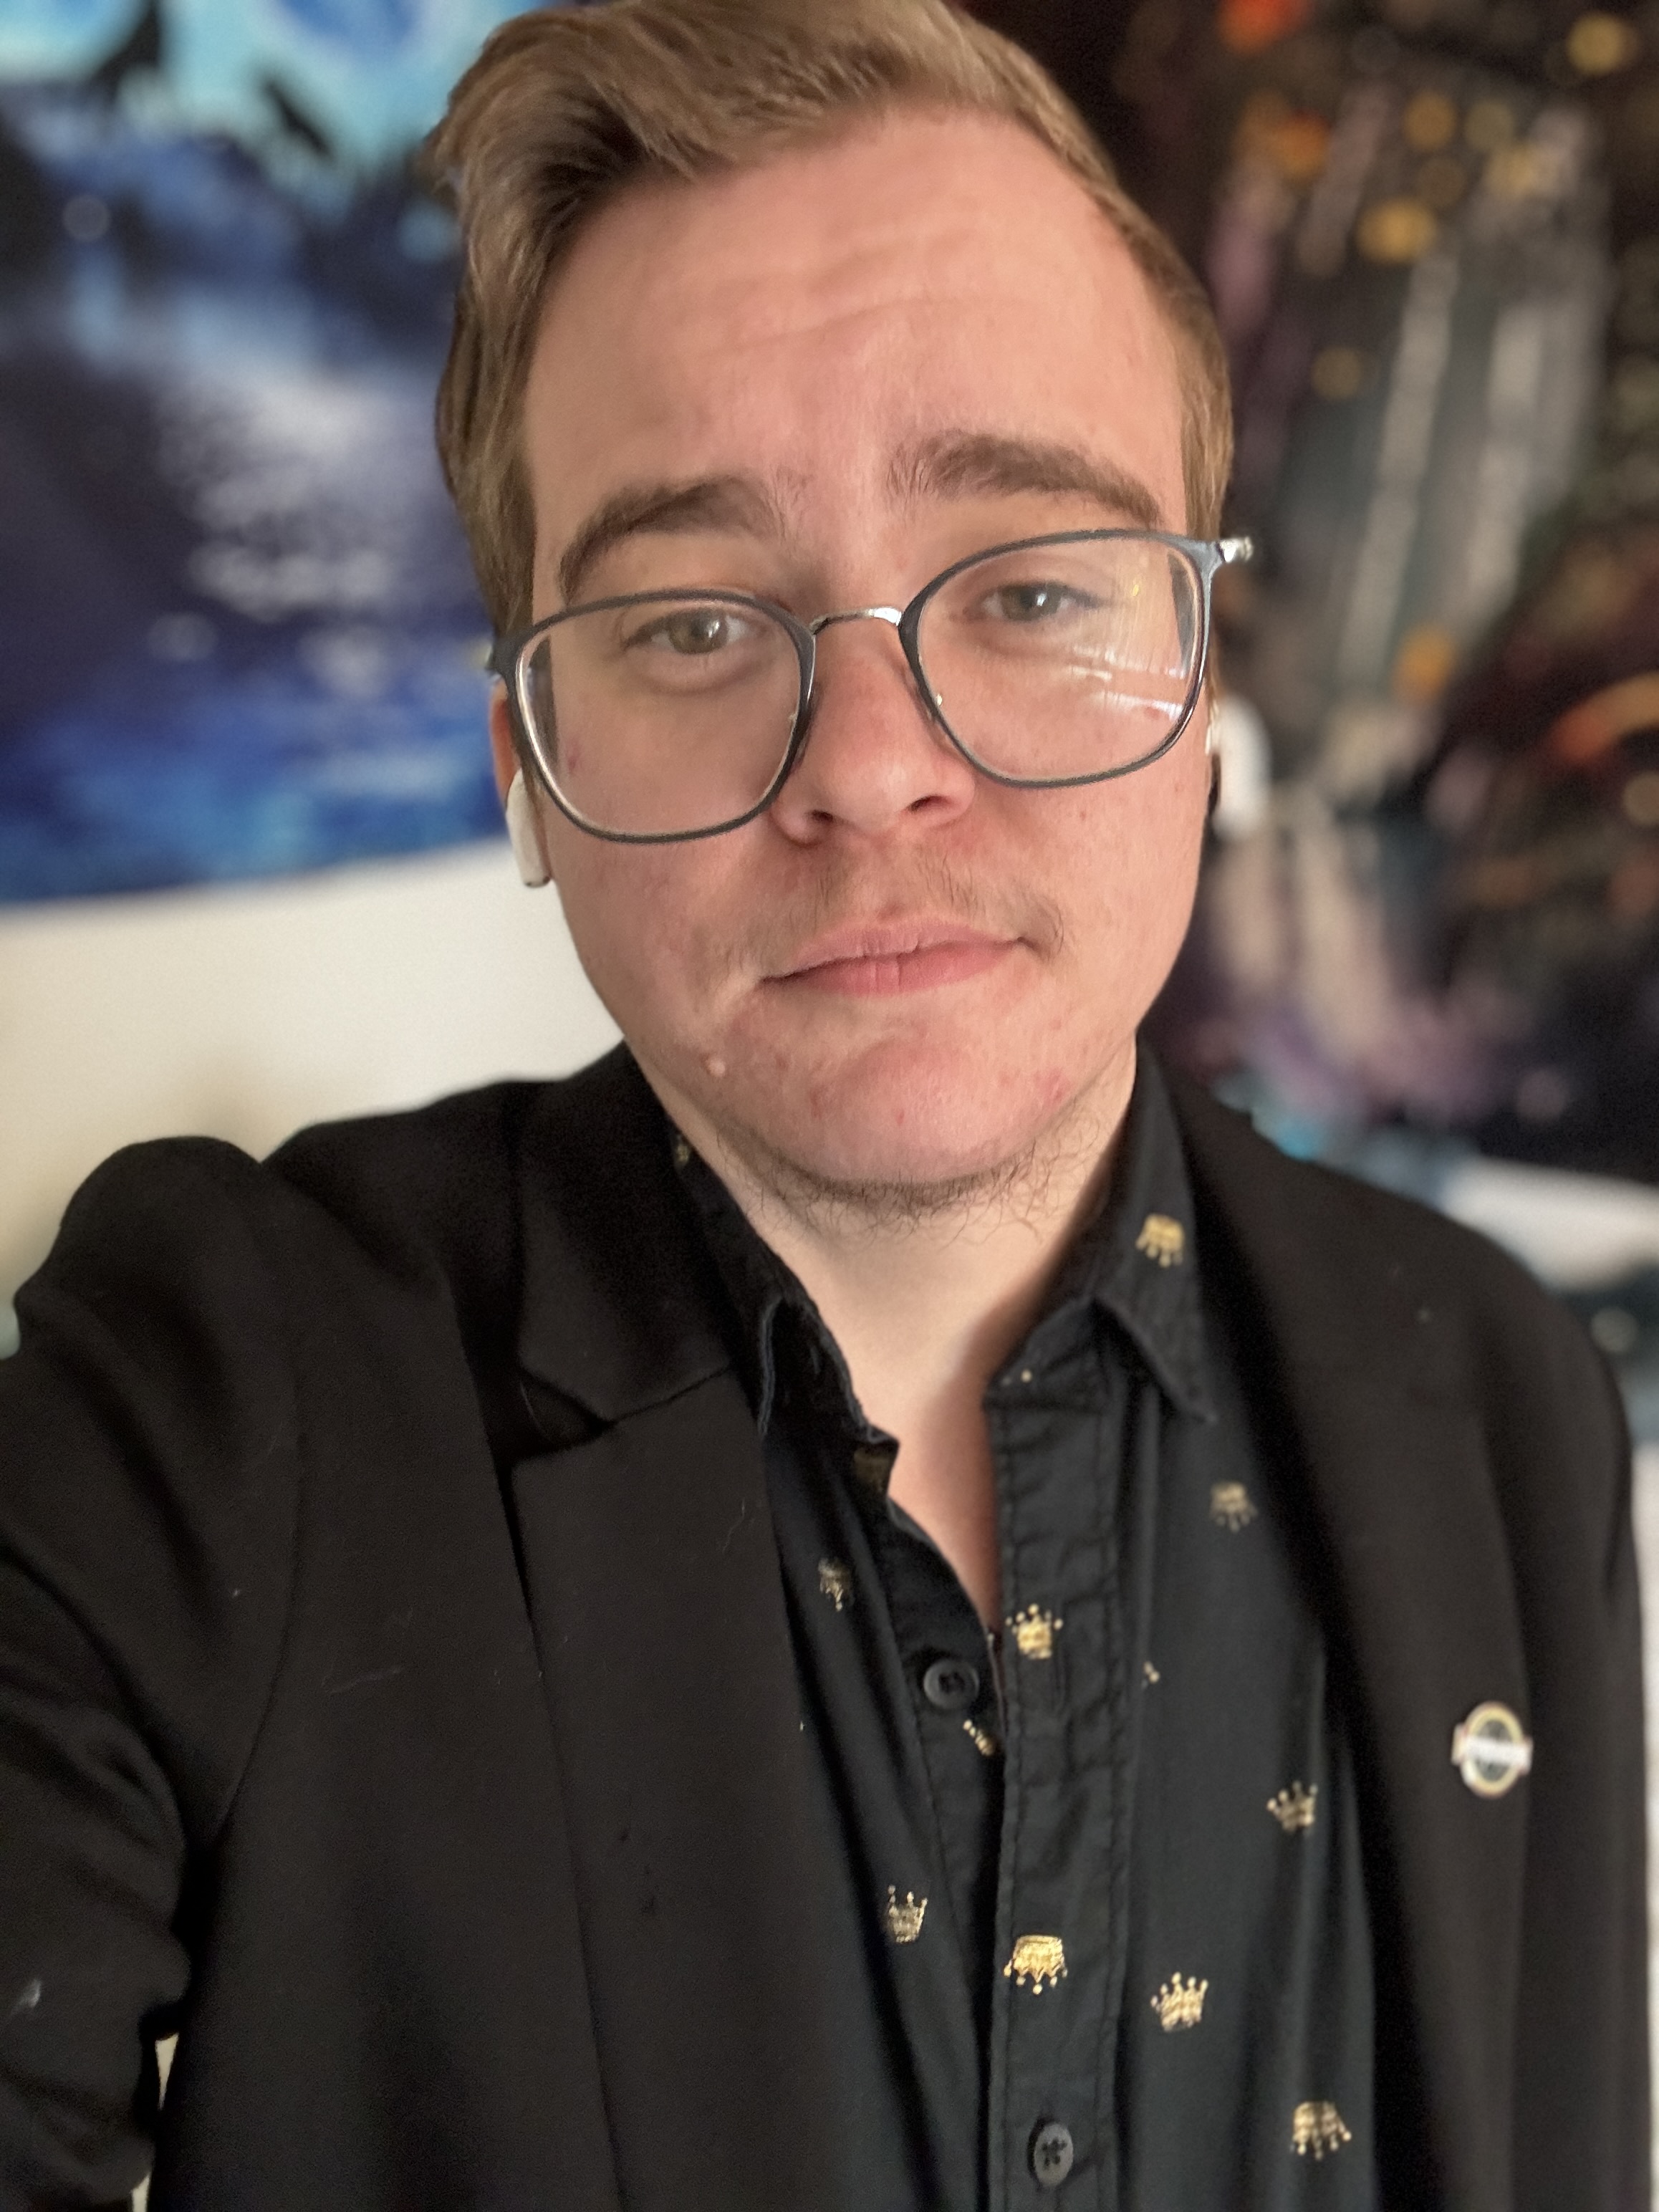 Photo of Harm Tarrant, a young white man with light brown hair and large rimmed glasses. He is wearing a black button up shirt. Text next to his photo says "Welcome Harm Tarrant. He/Him. Harm is APRIL's new Youth Advisory Specialist".